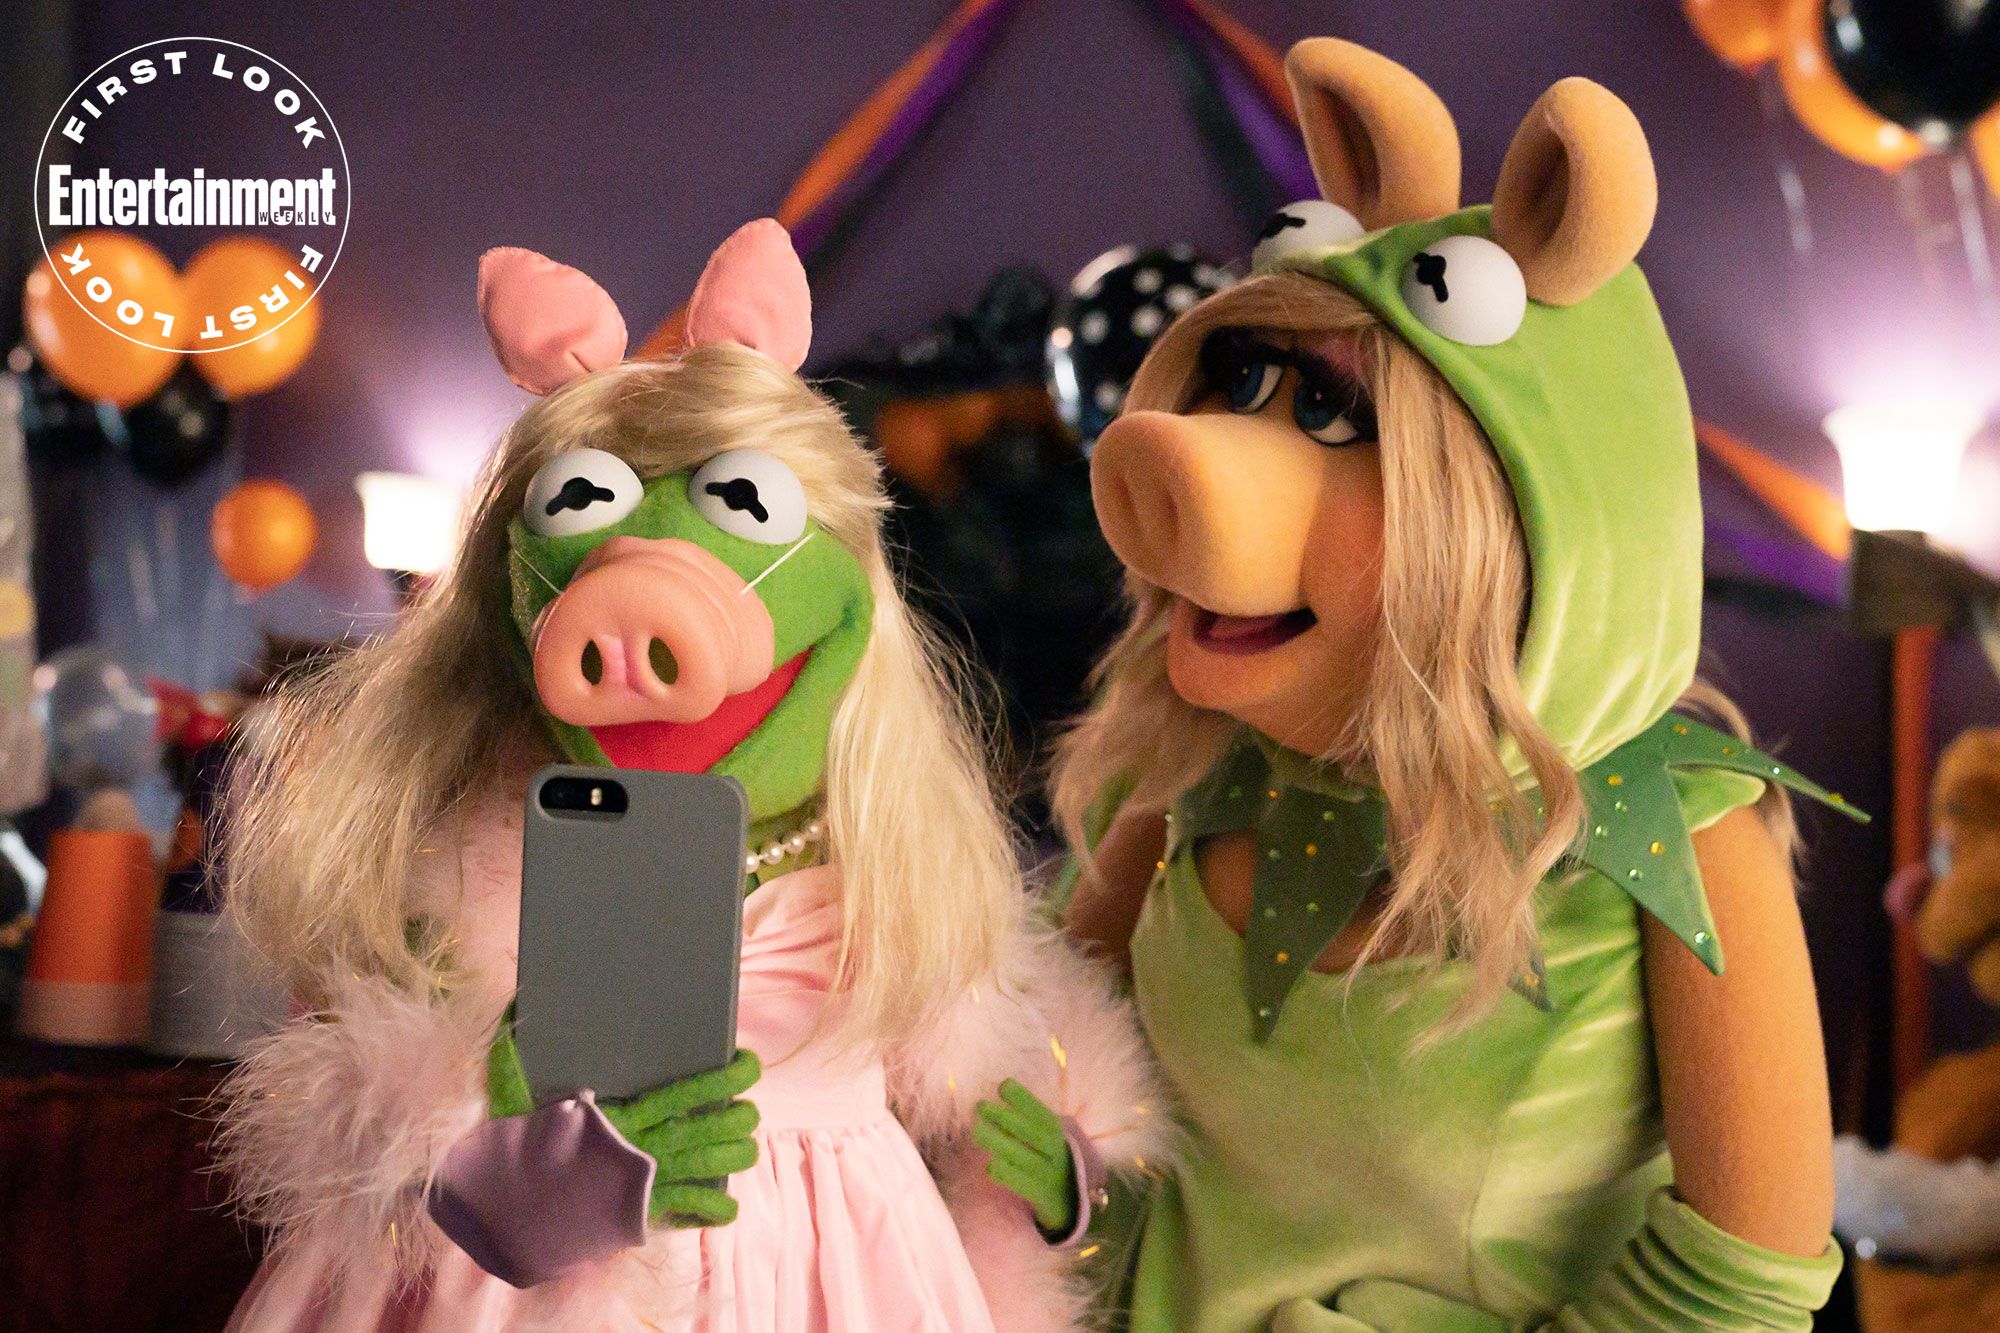 Muppets Haunted Mansion First Look Images Reveal Kermit Dressed As Miss Piggy